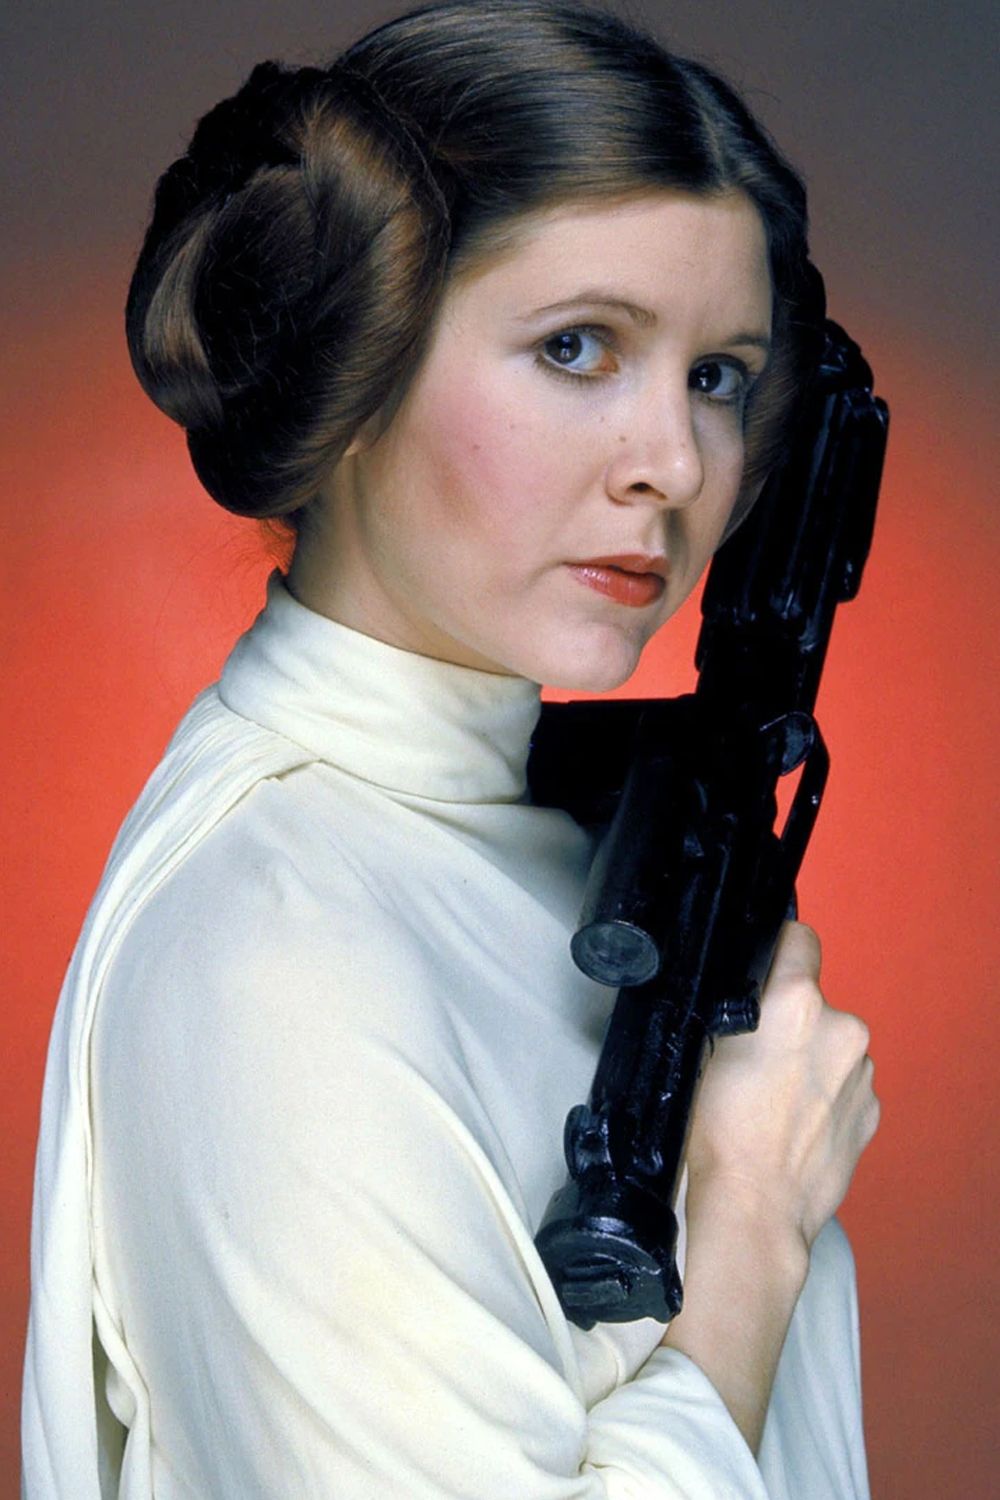 Carrie Fisher as Princess Leia Organa in Star Wars